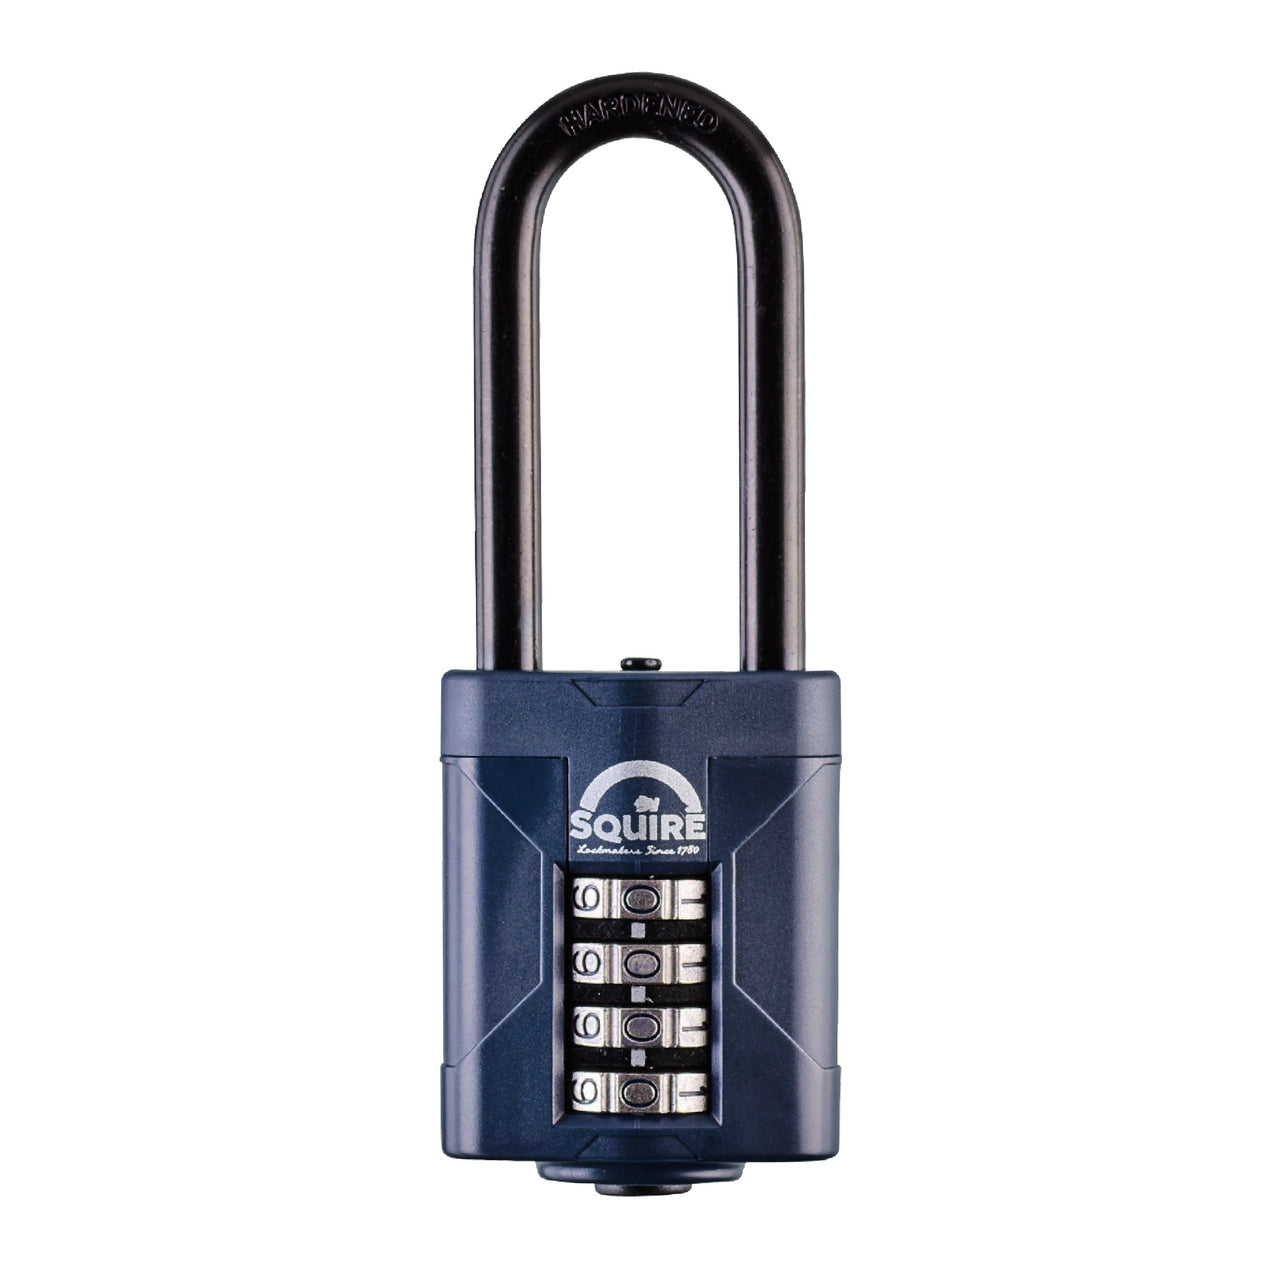 The Truth About Combination Locks - Are Combination Locks Secure